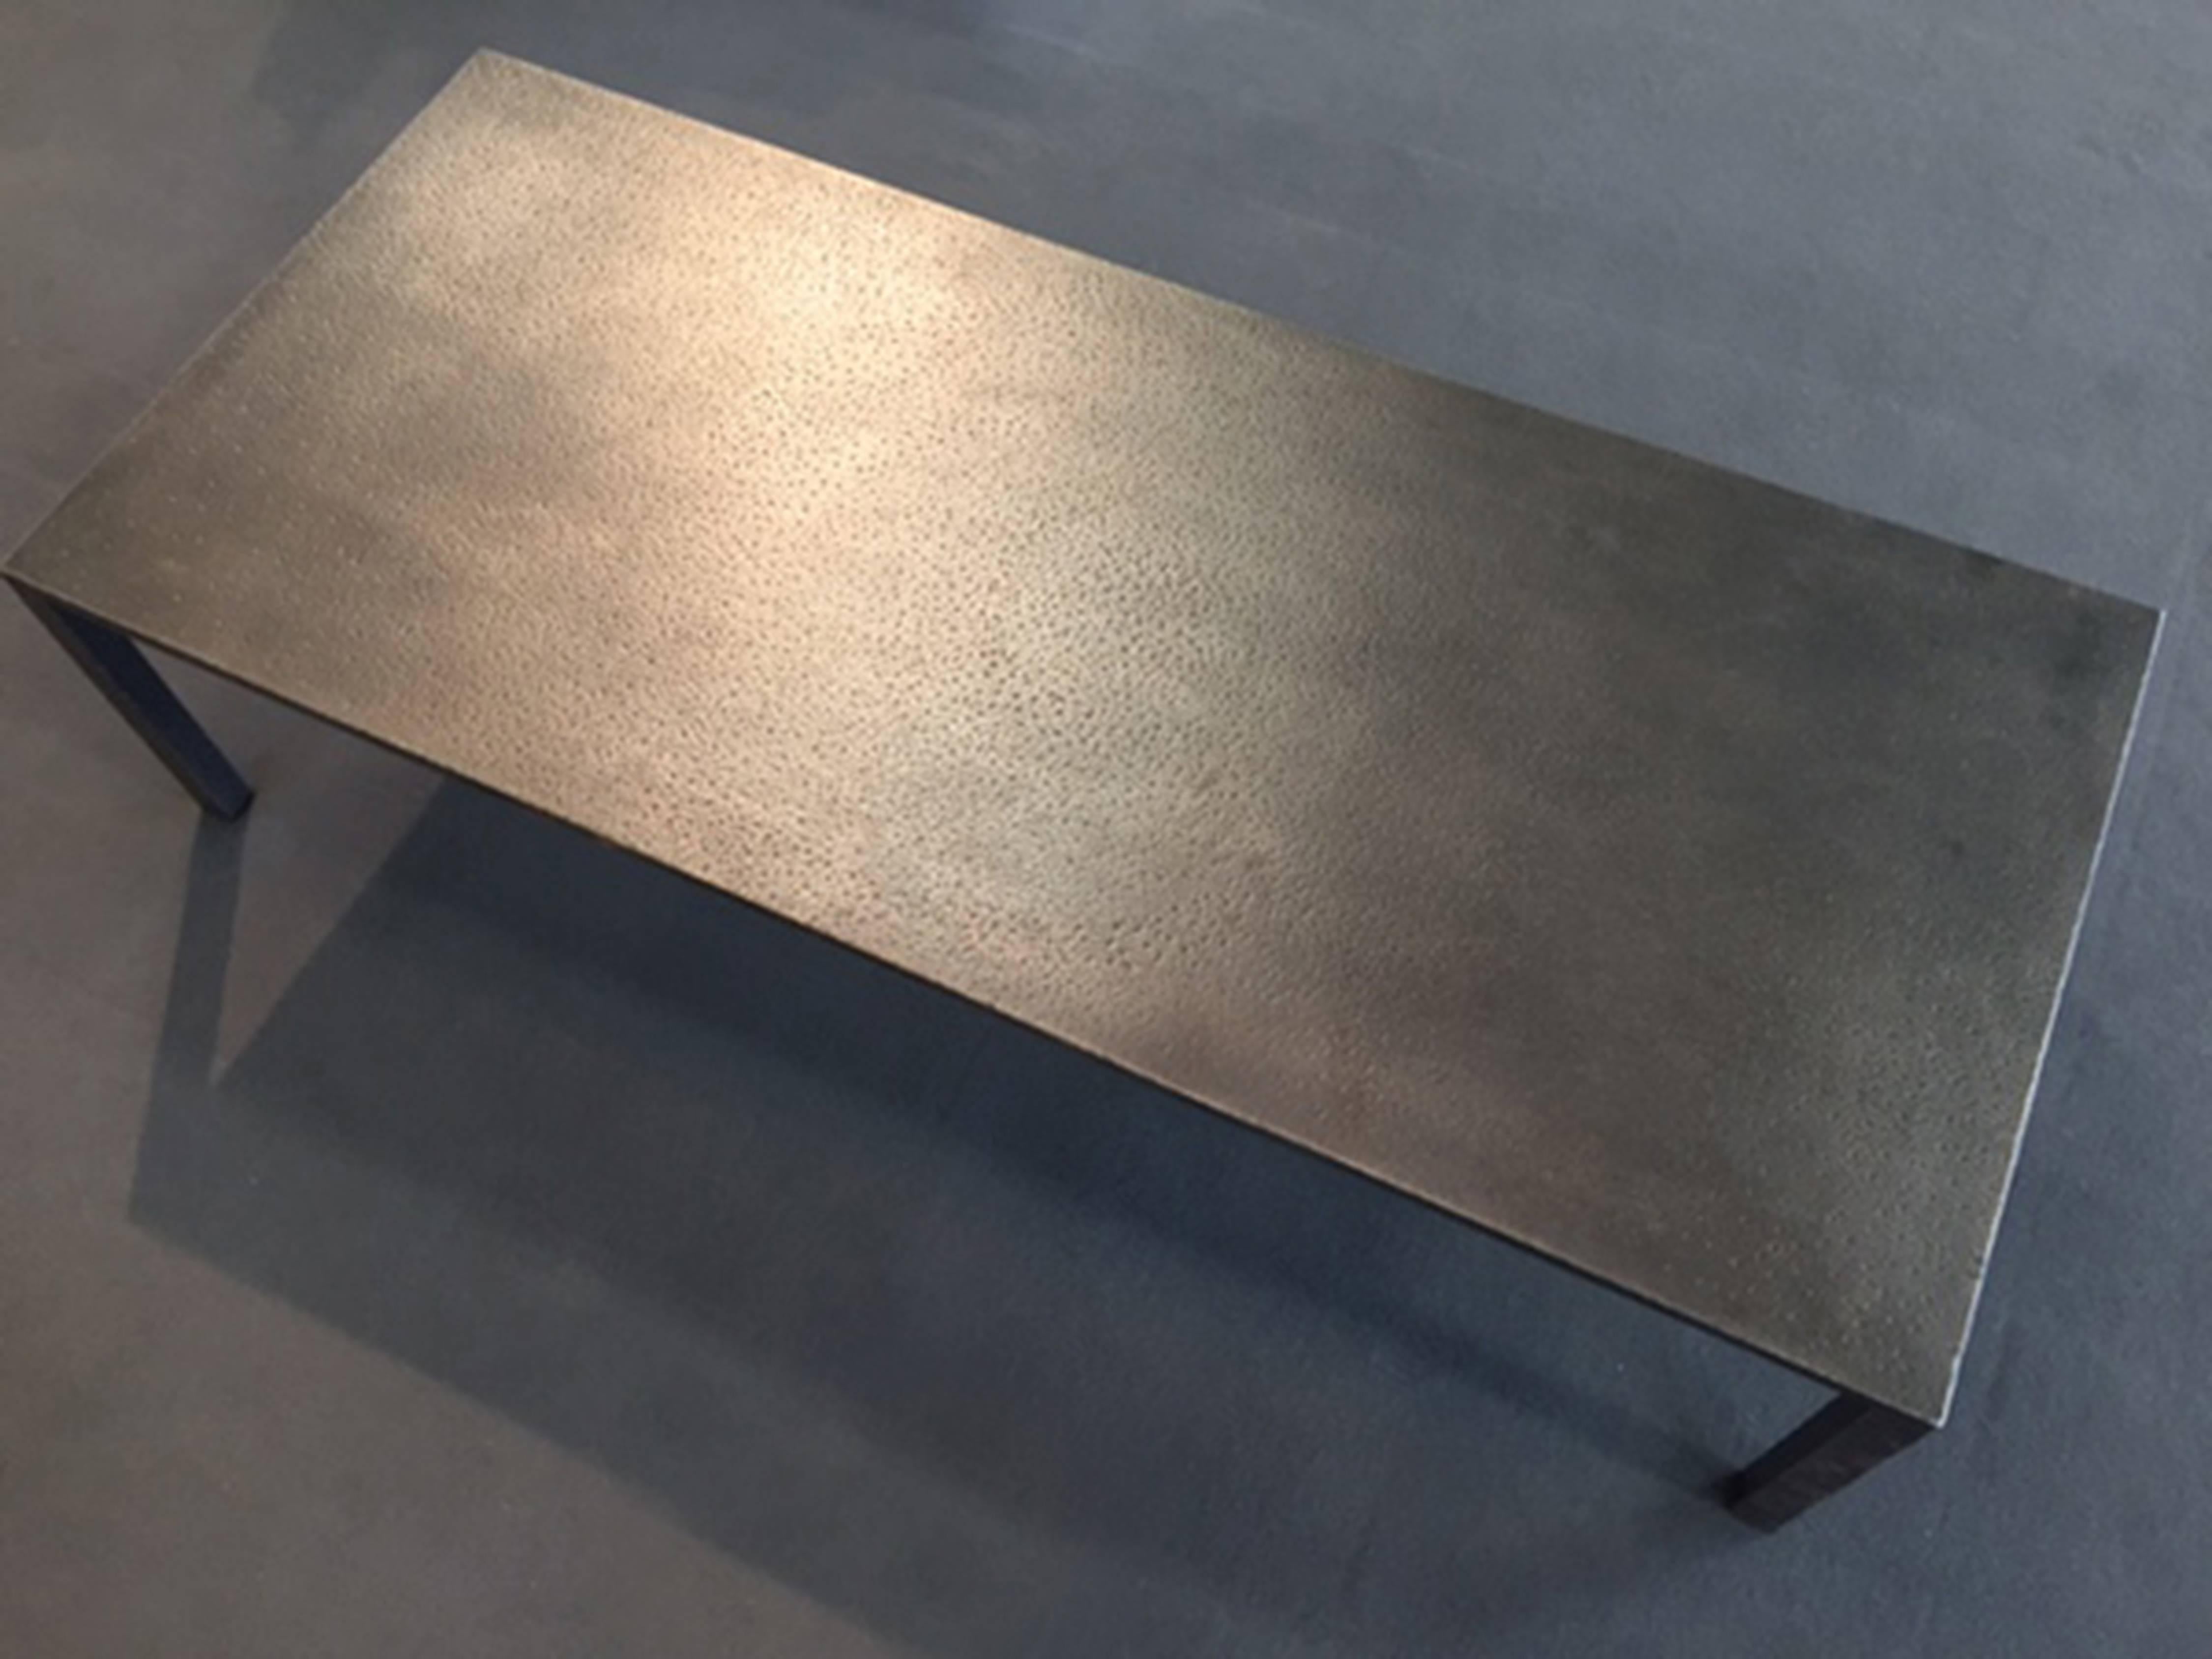 Low steel coffee table, hand-hammered textured. This table combines minimalism with a rustic aesthetic, giving this table a clean and bold presence.